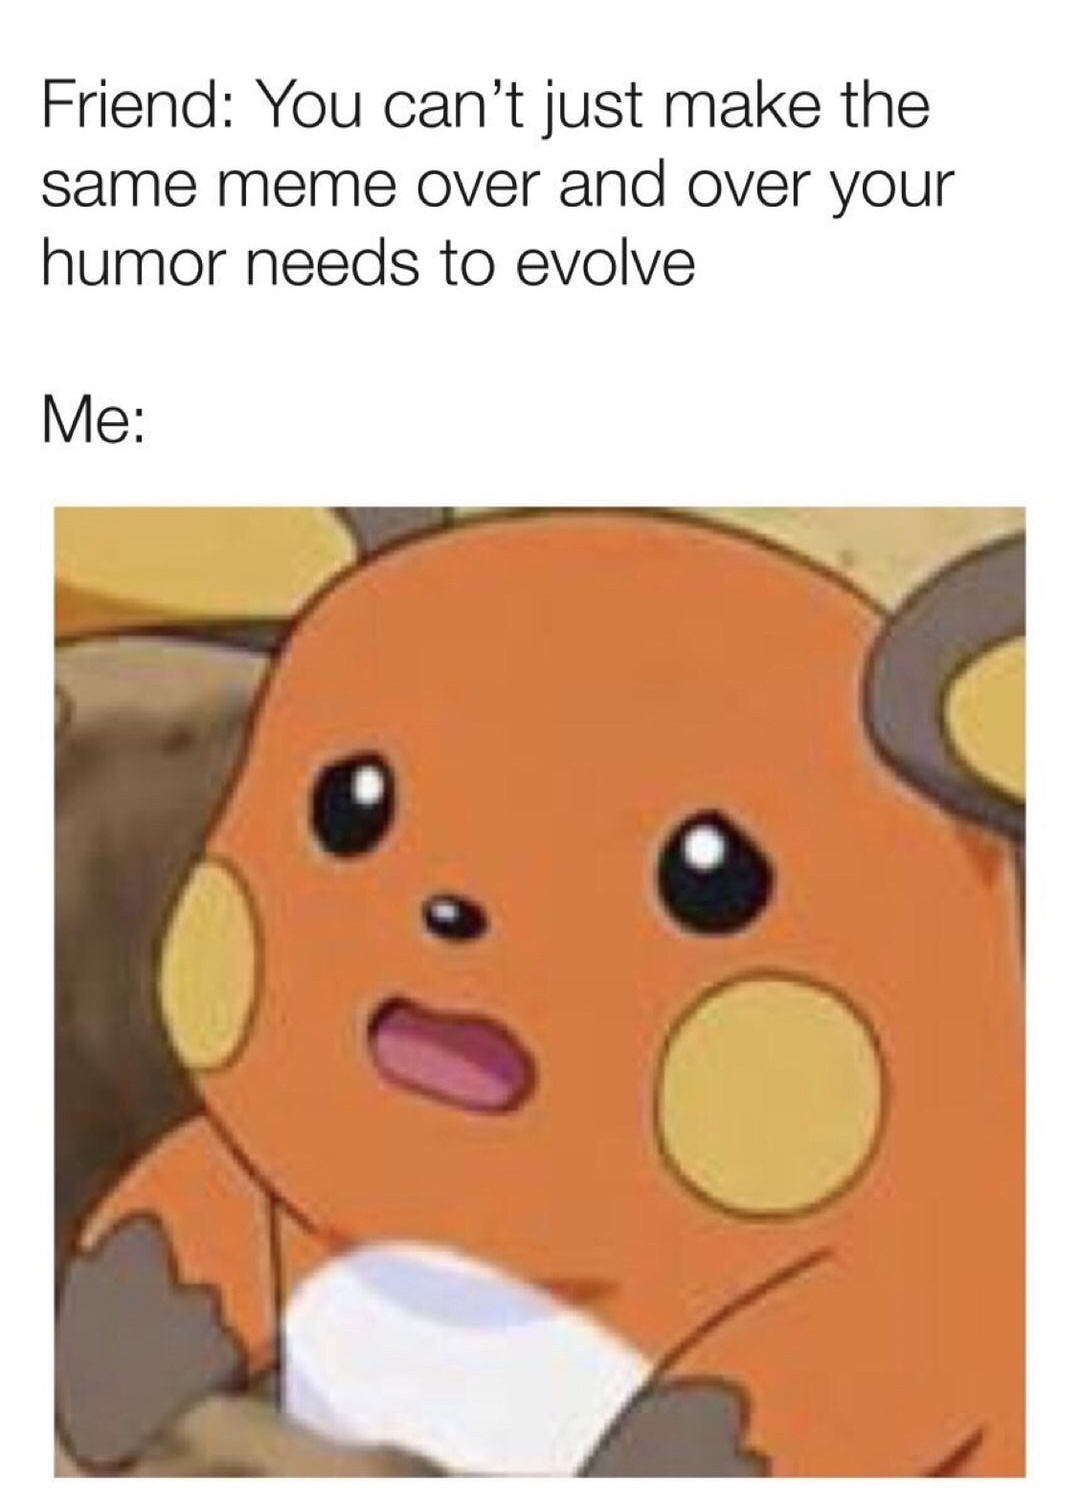 surprised pikachu meme - Friend You can't just make the same meme over and over your humor needs to evolve Me